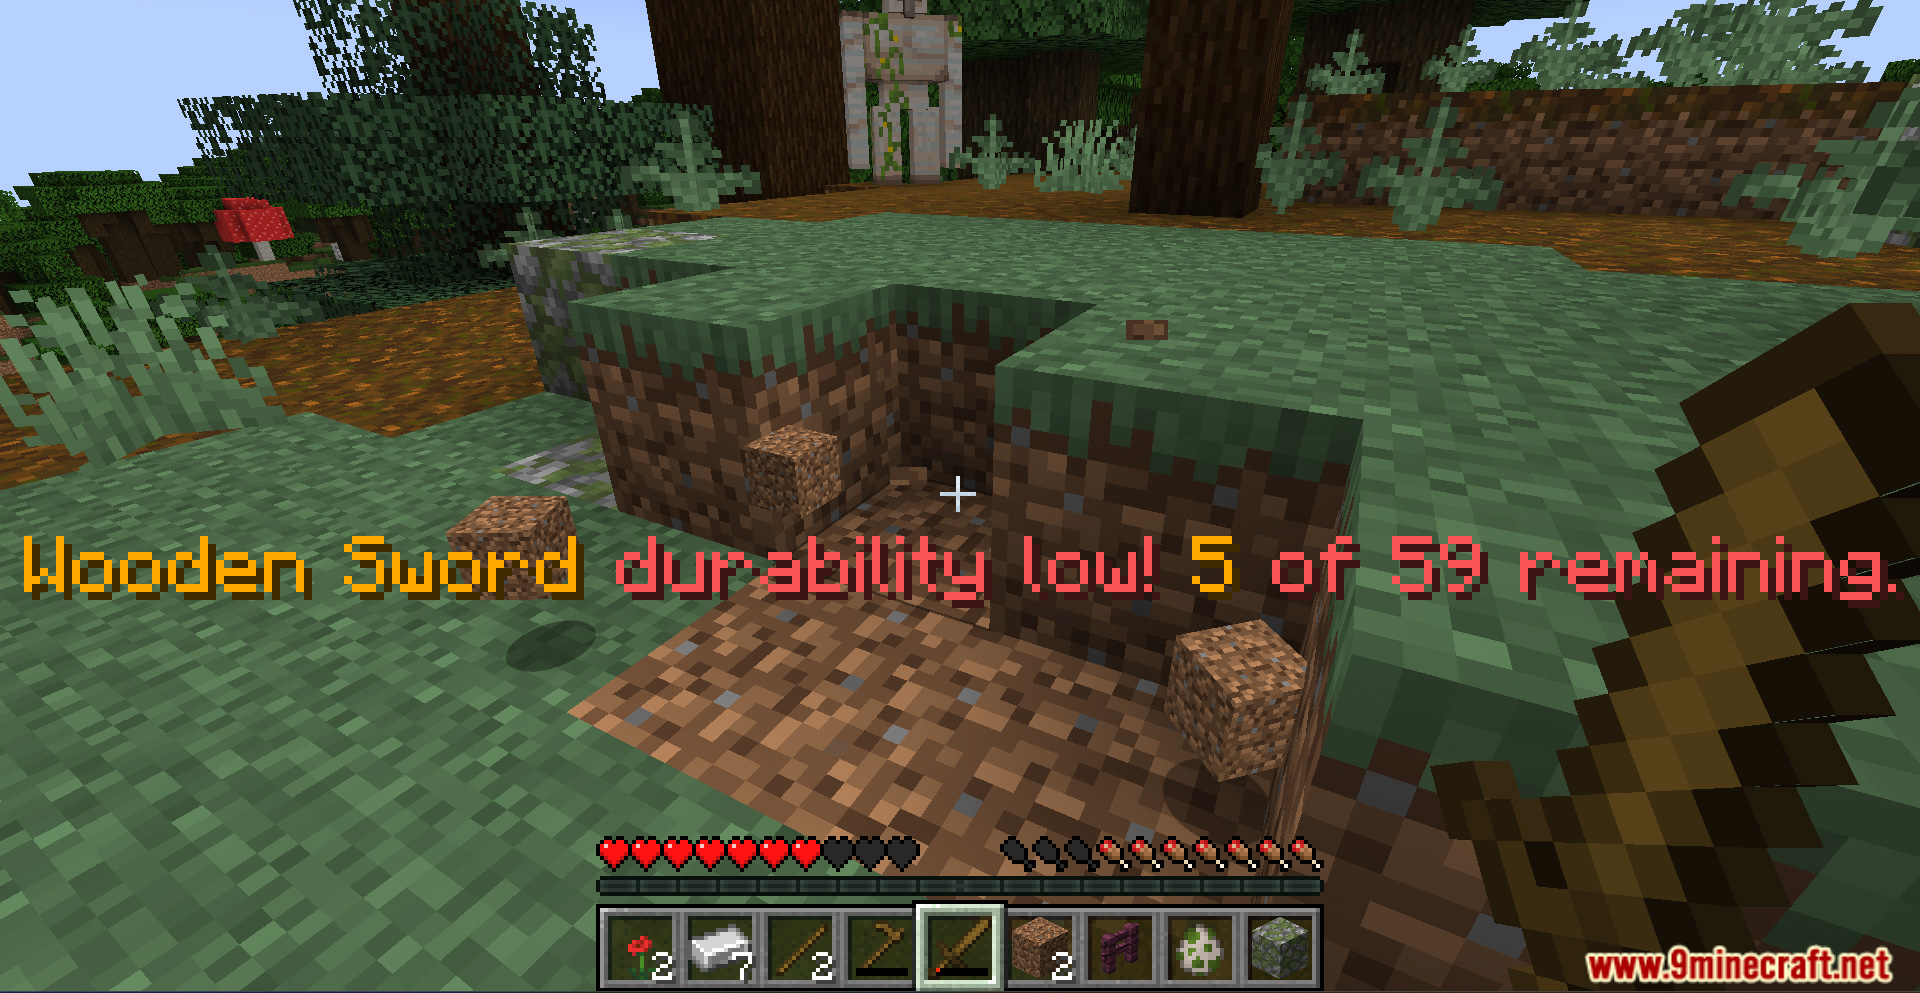 Durability Ping Data Pack (1.20.4, 1.20.1) - Never Get Caught Empty-Handed 8